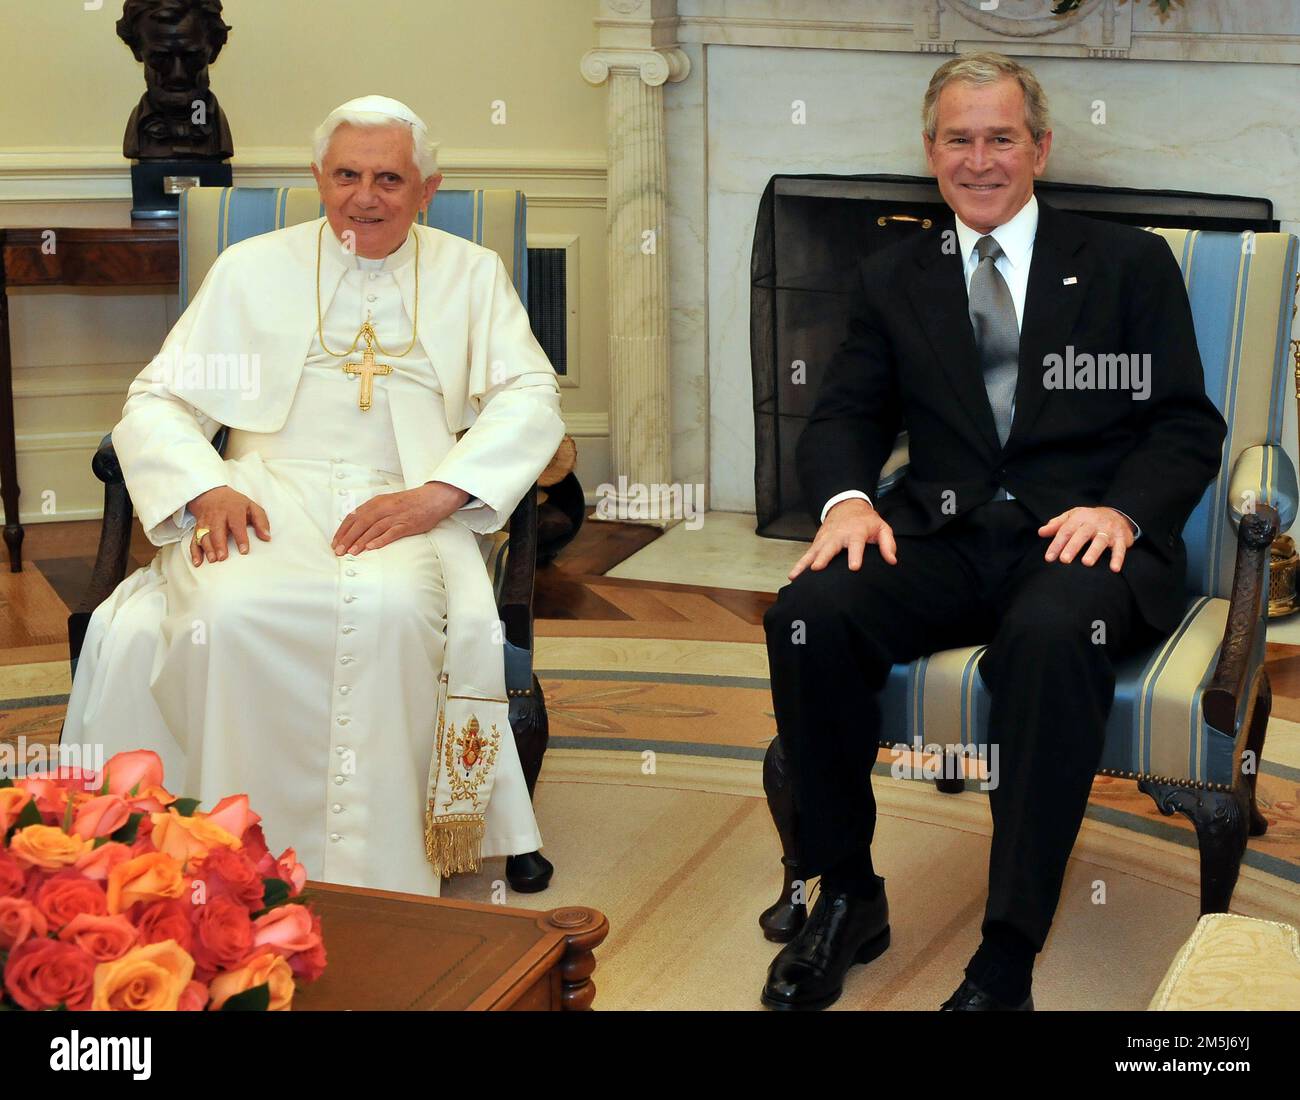 Pope Benedict XVI and United States President George W. Bush pose for a photo in the Oval Office at the White House in Washington, D.C. on Wednesday, April 16, 2008.  .Credit: Ron Sachs / CNP.(RESTRICTION: NO New York or New Jersey Newspapers or newspapers within a 75 mile radius of New York City) / MediaPunch Stock Photo